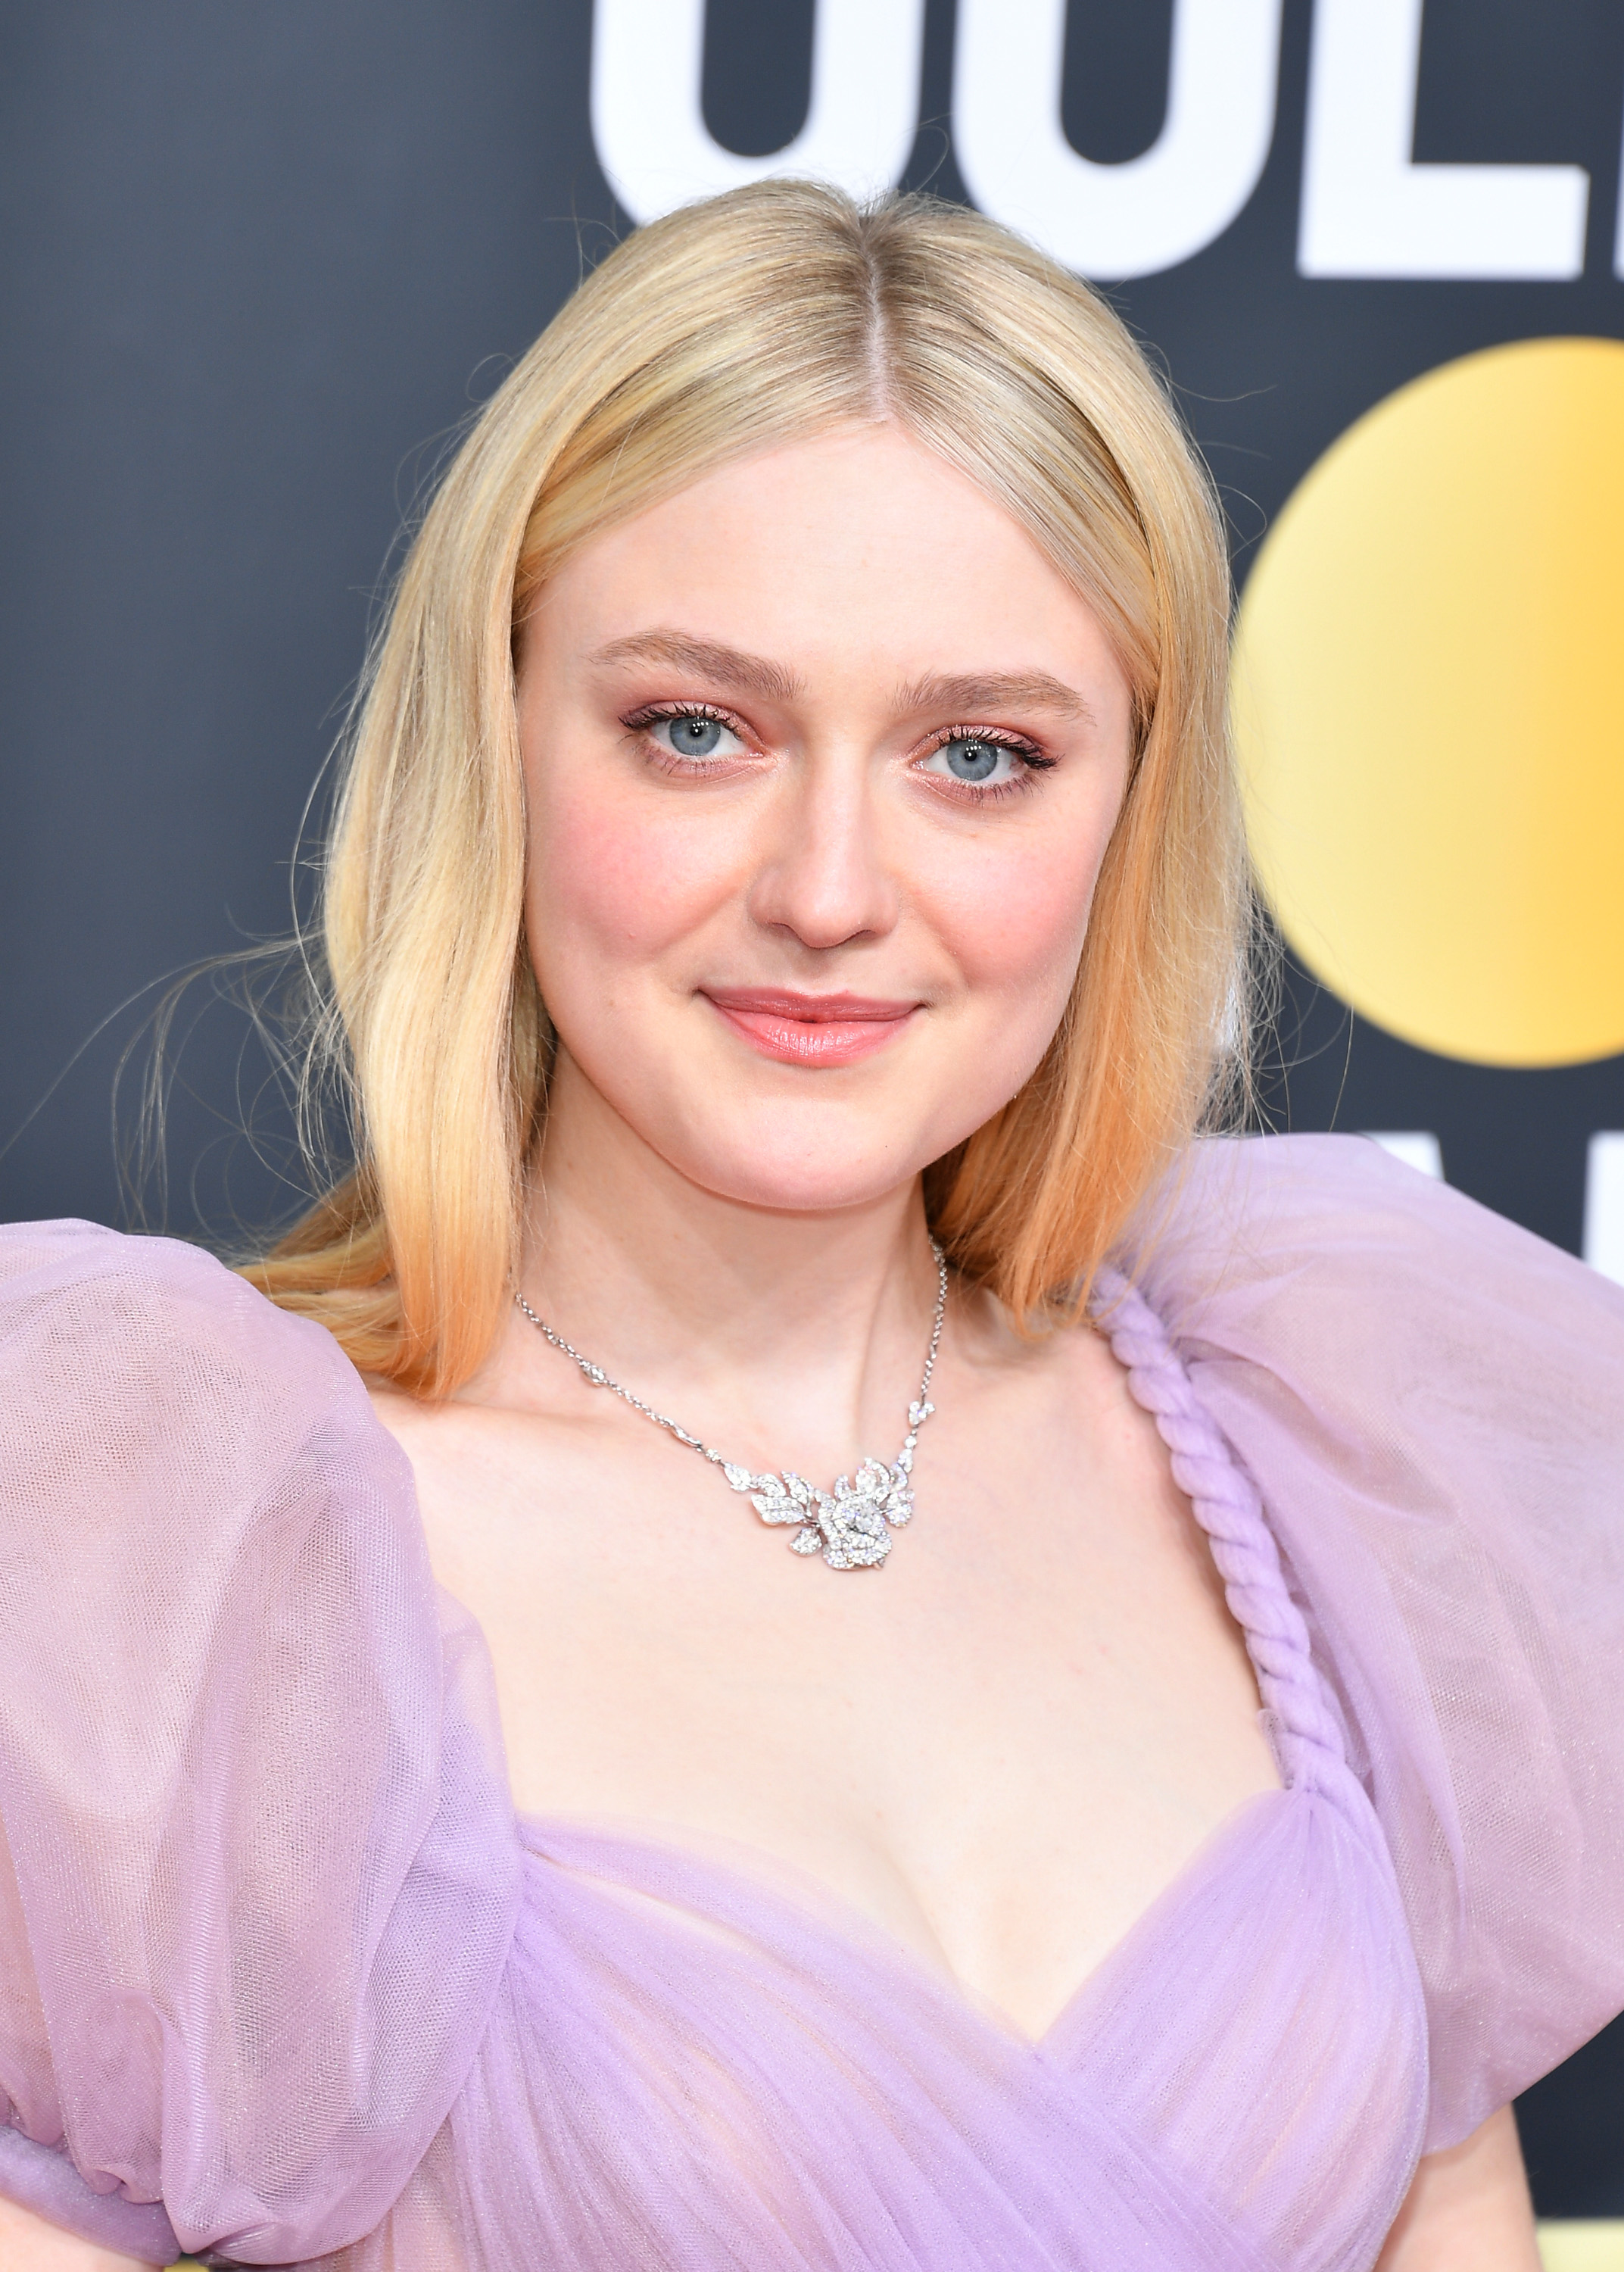 Dakota Fanning attends the 77th Annual Golden Globe Awards on January 5, 2020 in Beverly Hills, California | Source: Getty Images